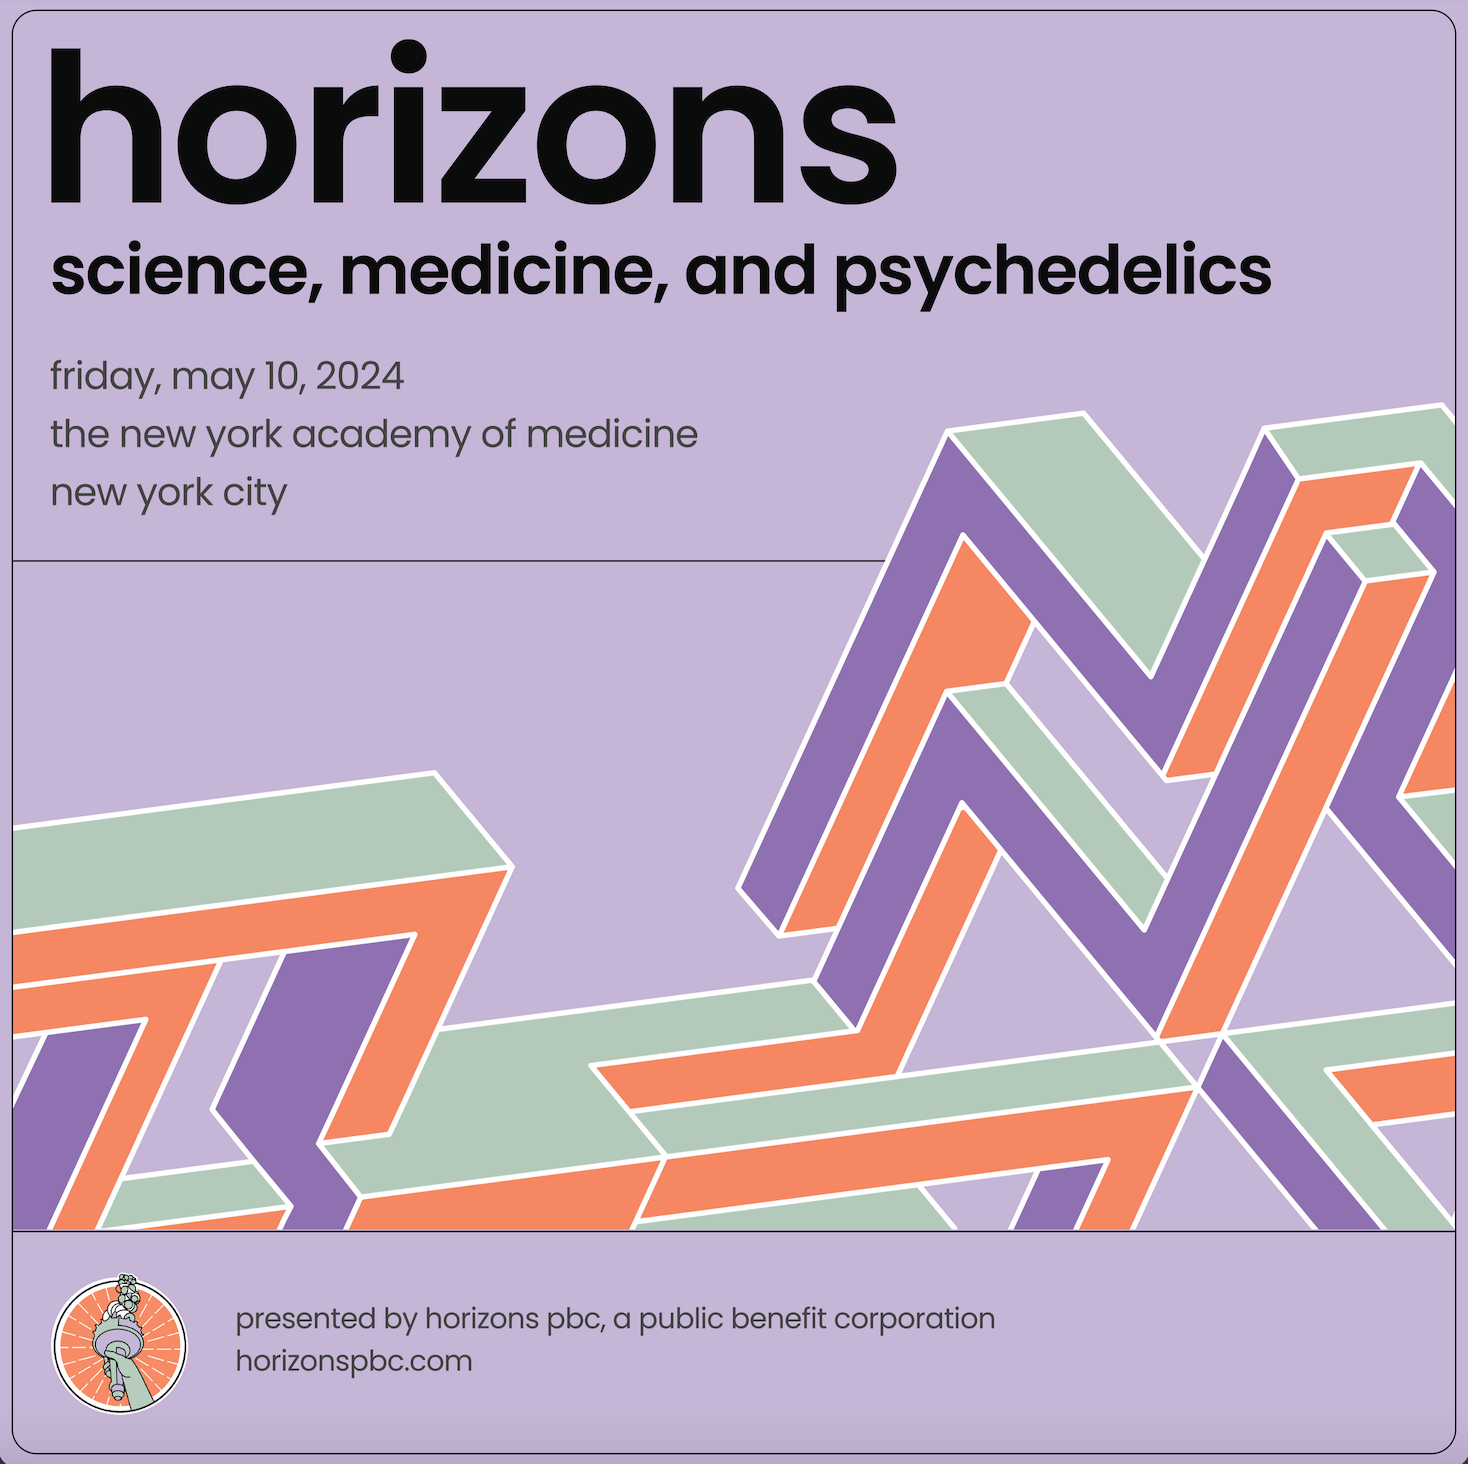 A poster for horizons science medicine and psychedelics